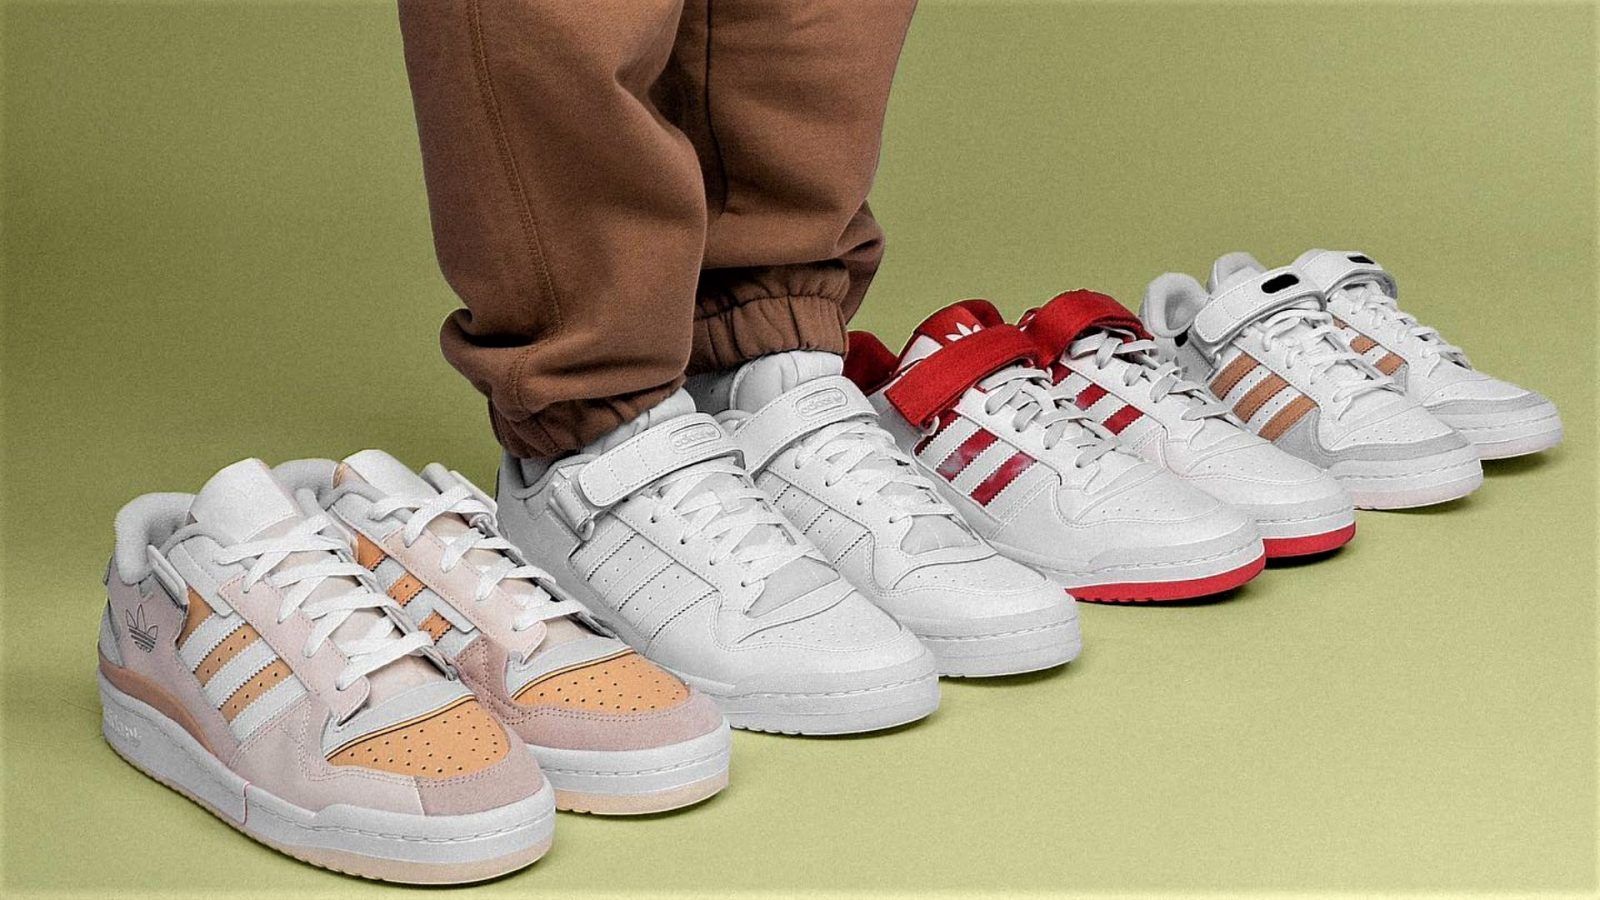 coolest Adidas for men to cop their collection